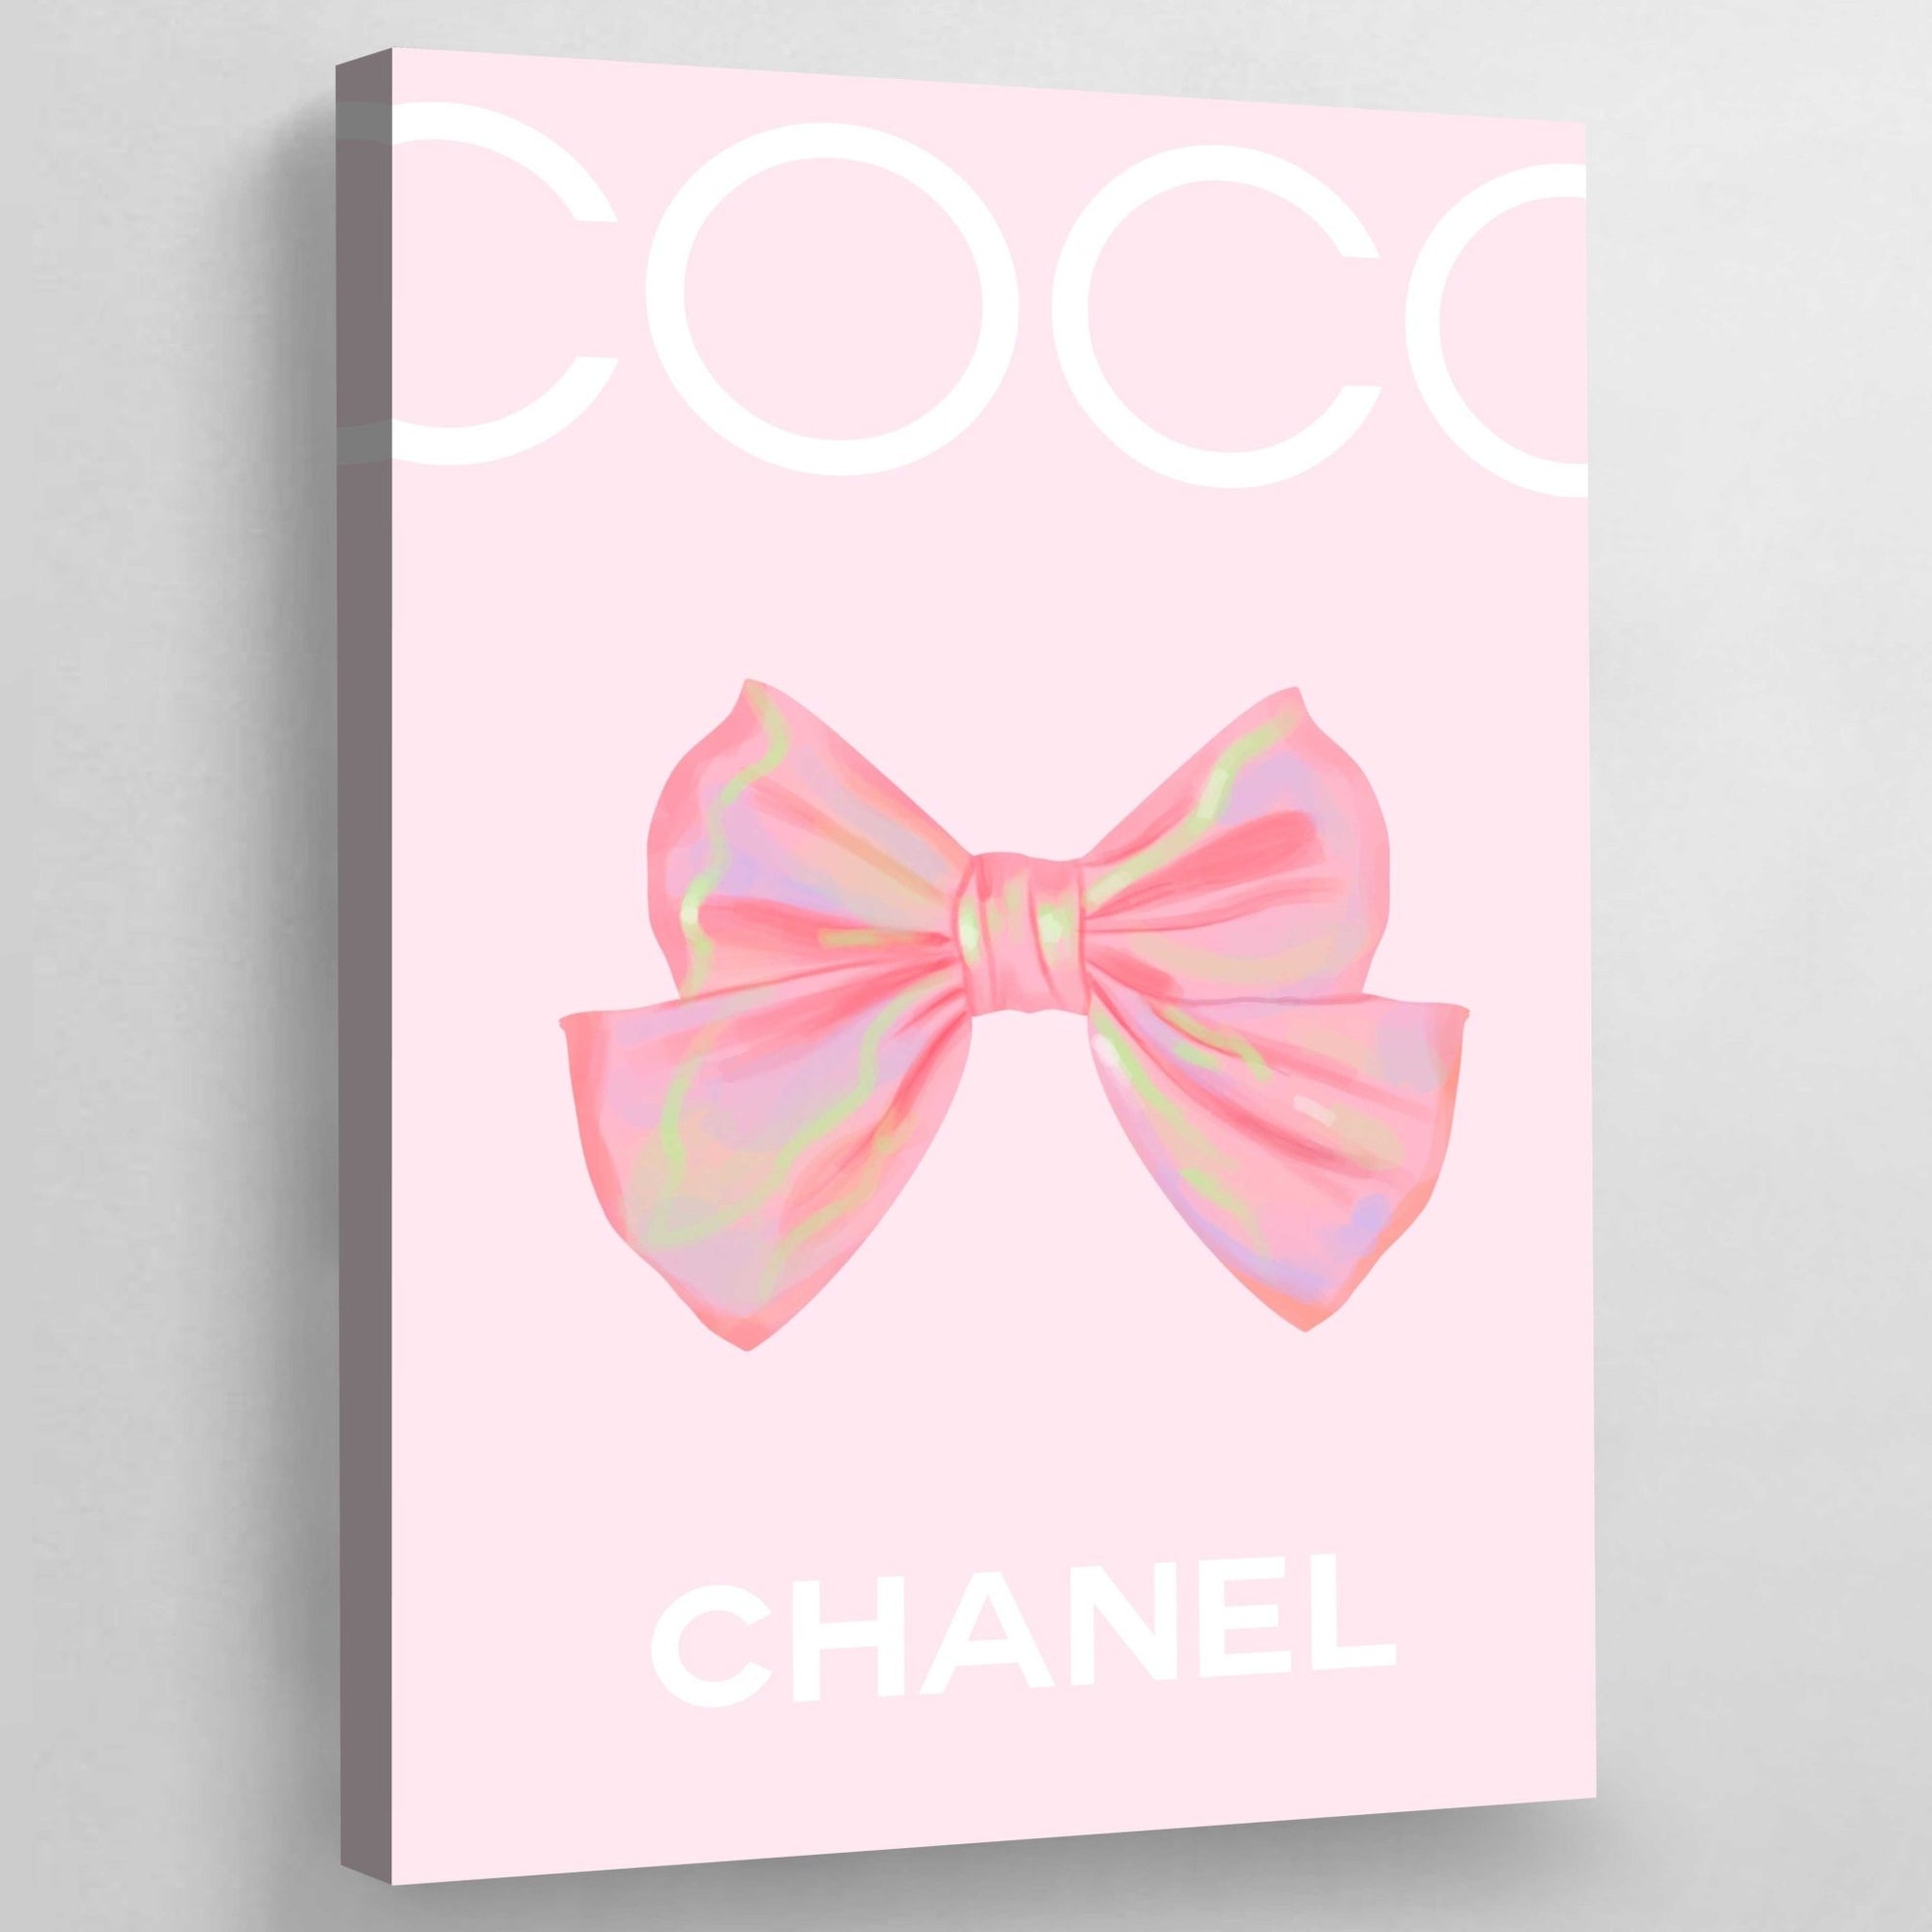 Tableau Coco Chanel Rose - The Art Avenue